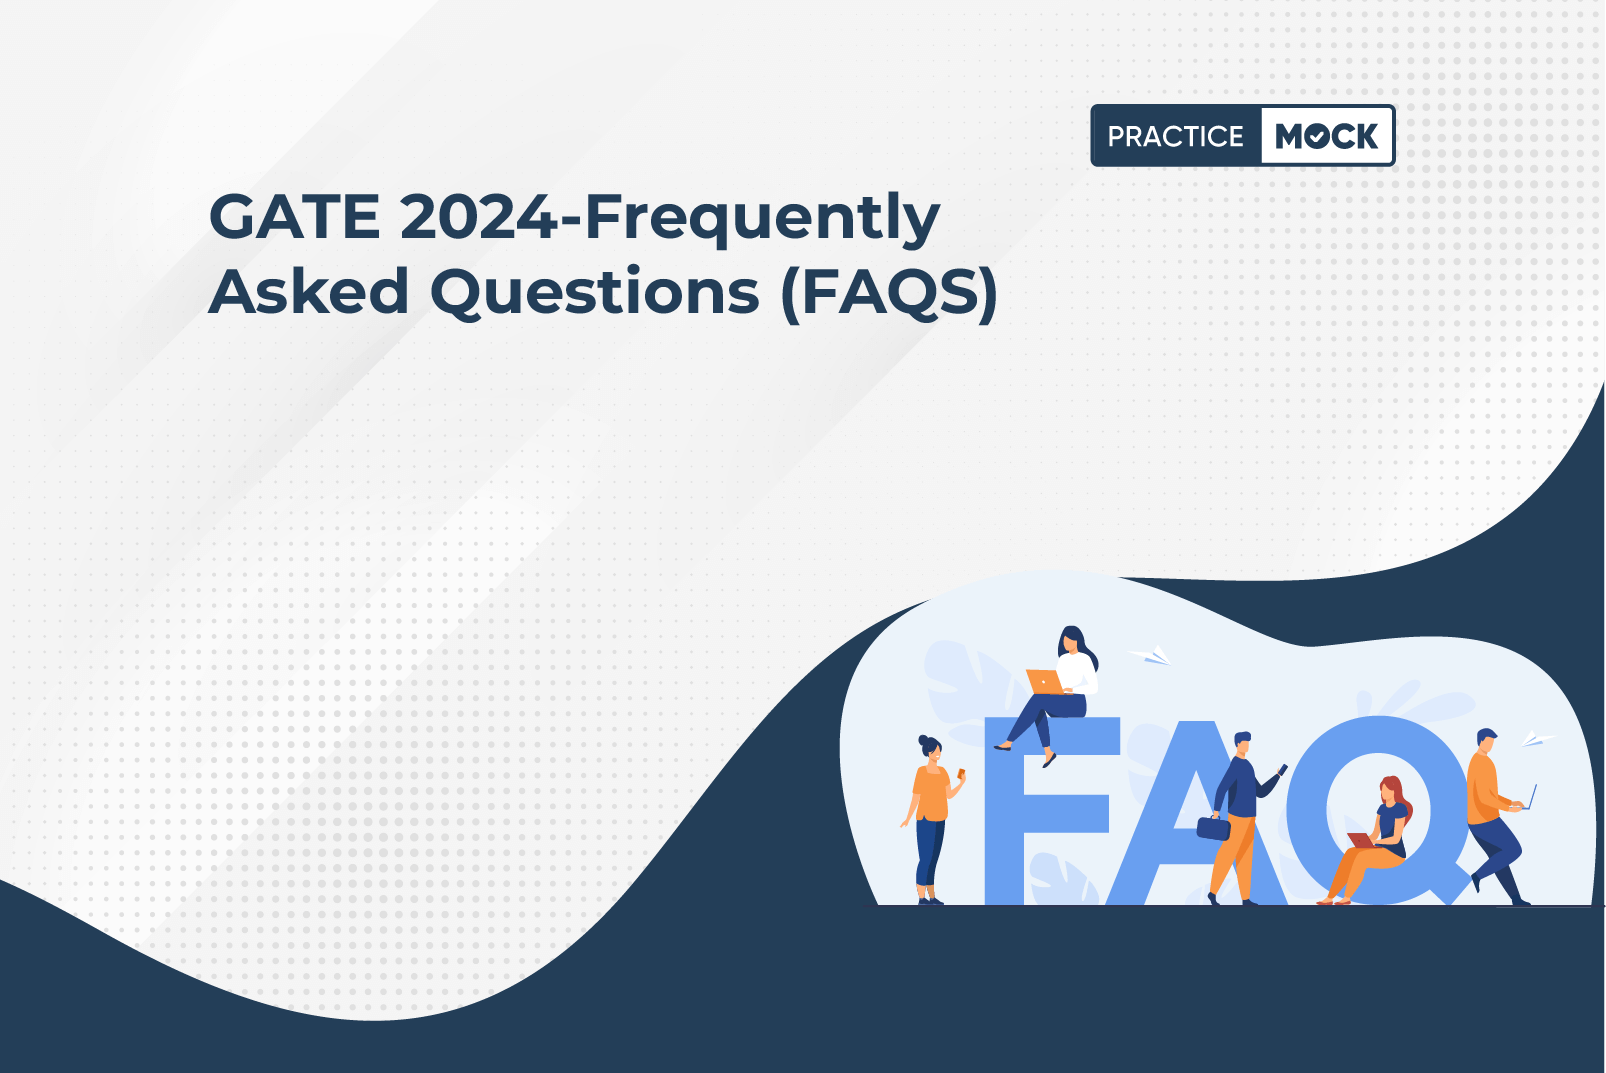 GATE 2024: Frequently Asked Questions (FAQS) for Civil & Mechanical Engineering Exams